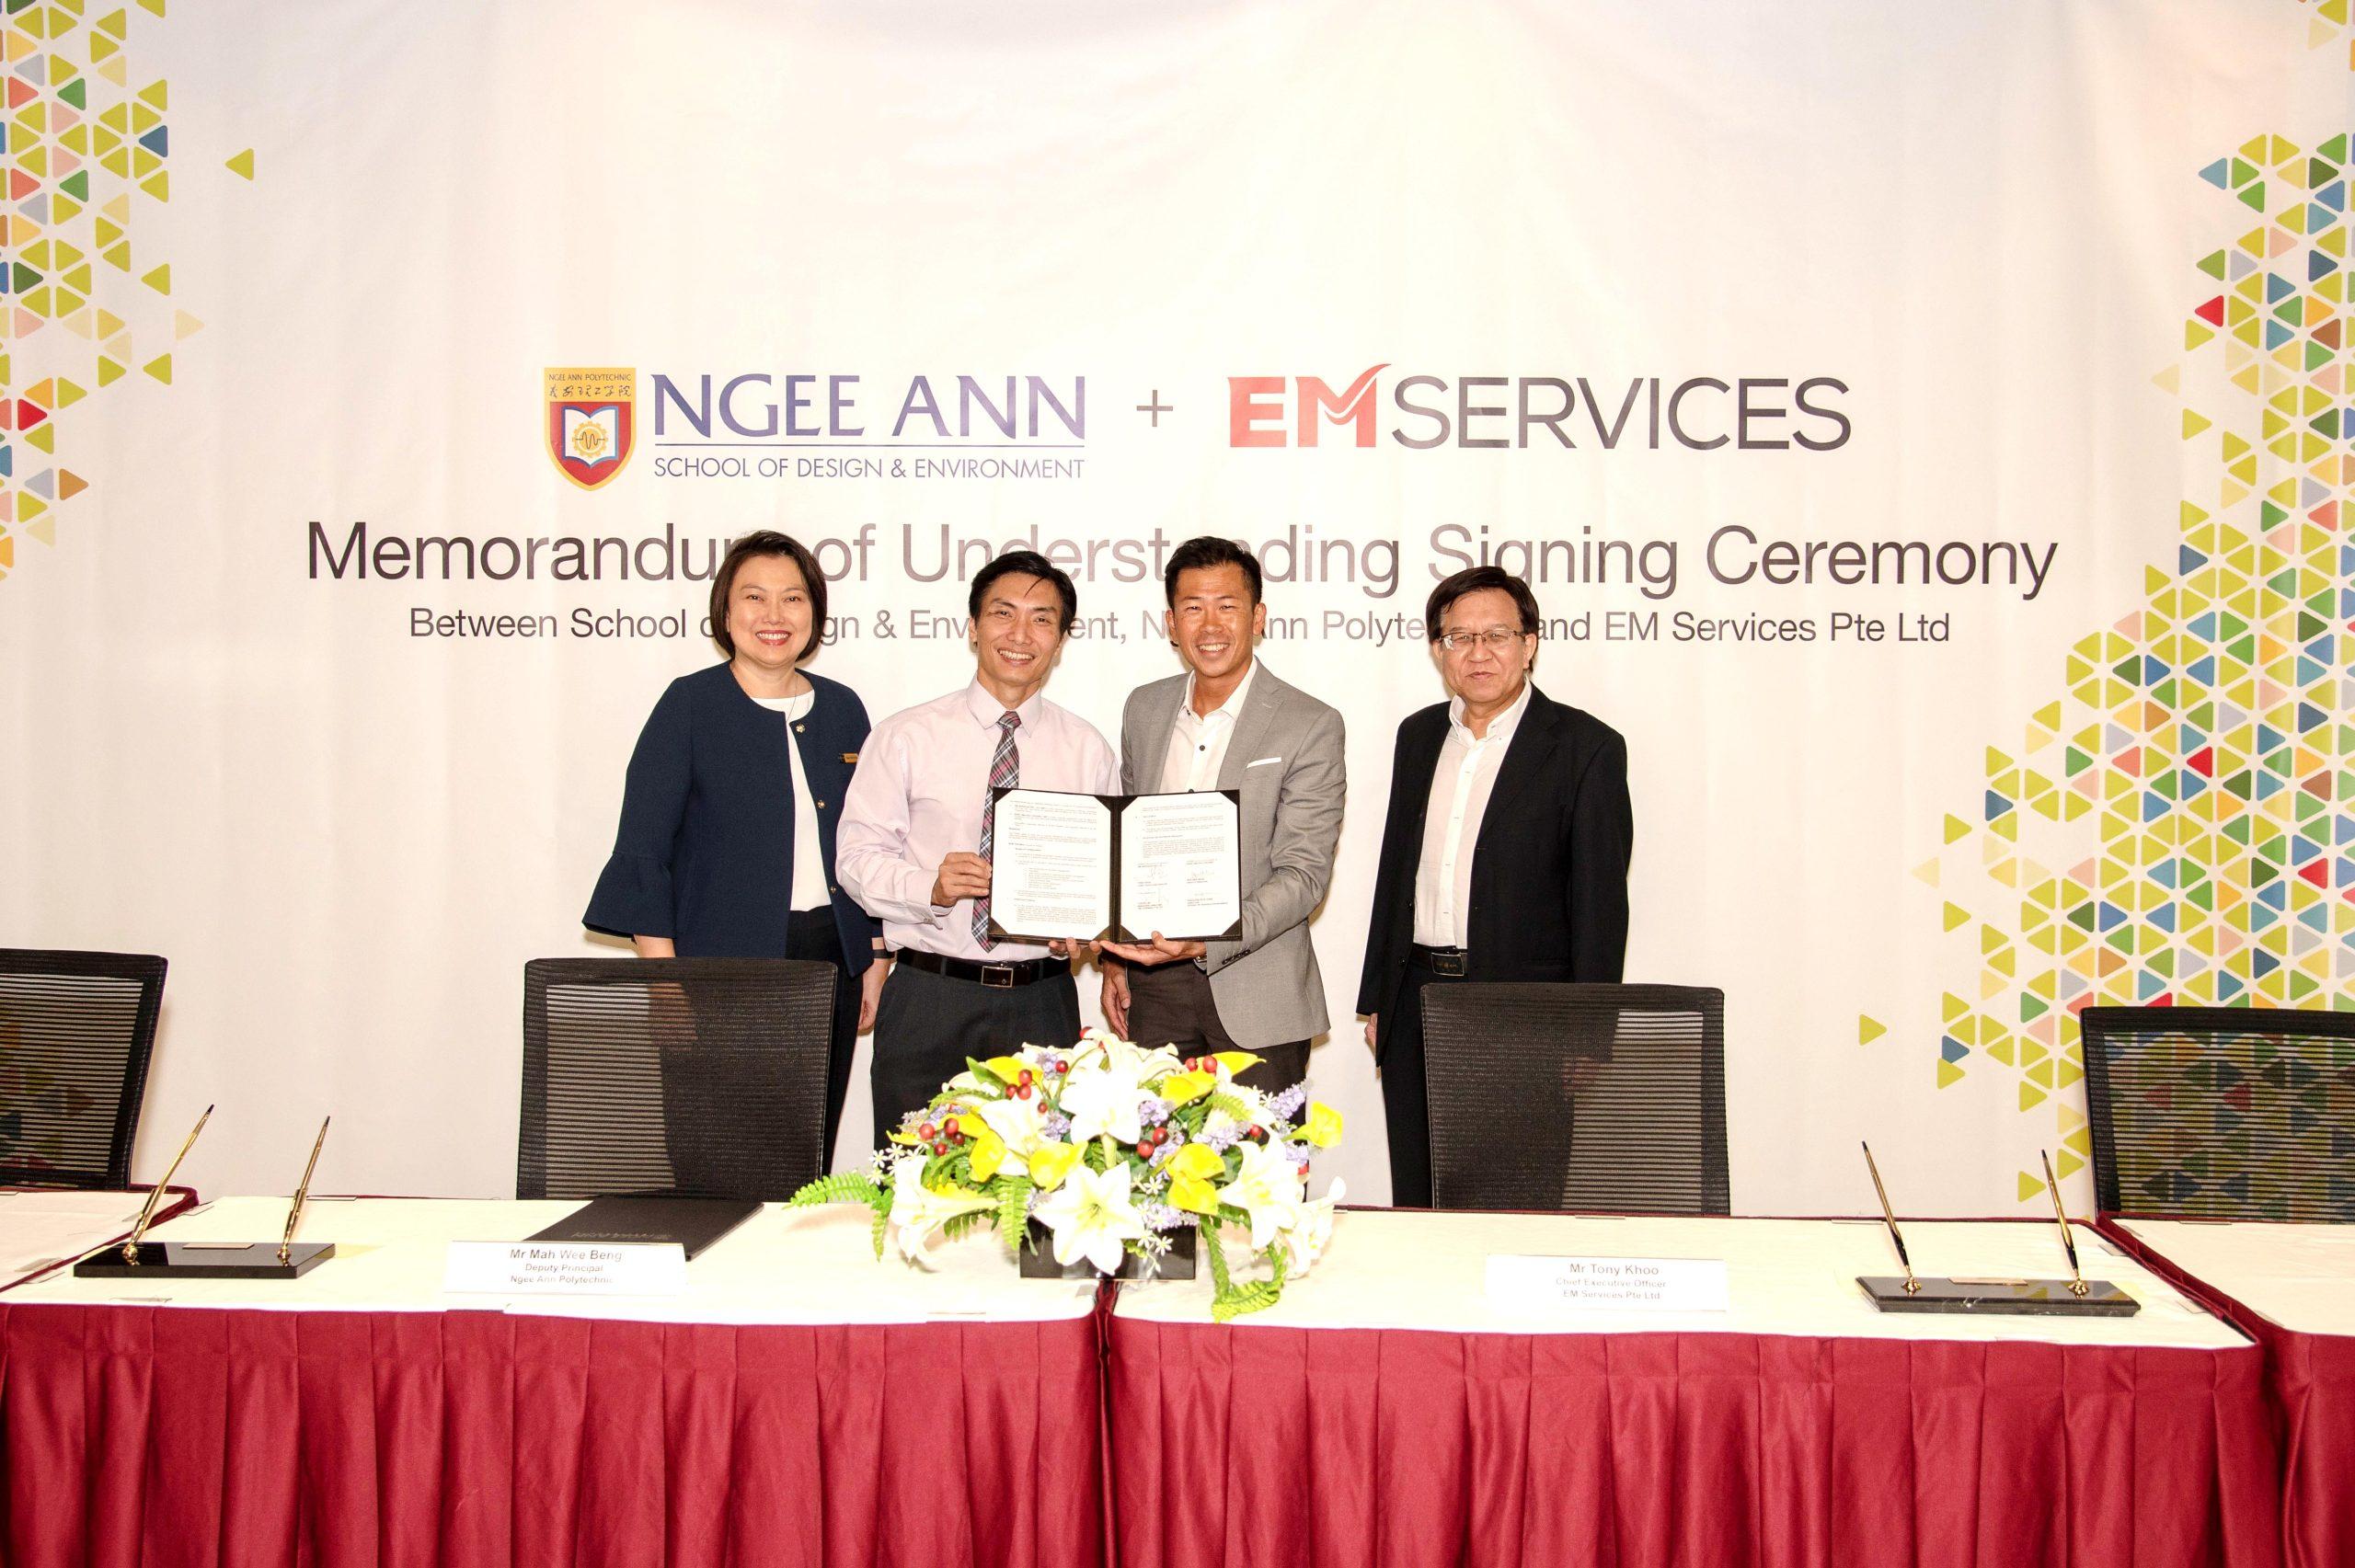 (from L – R) : Ngee Ann Polytechnic Director of School of Design & Environment Mrs Pang-Eng Peck Hon, Ngee Ann Polytechnic Deputy Principal Mr Mah Wee Beng, EM Services CEO Mr Tony Khoo and EM Learning Managing Director Mr Justin Lim